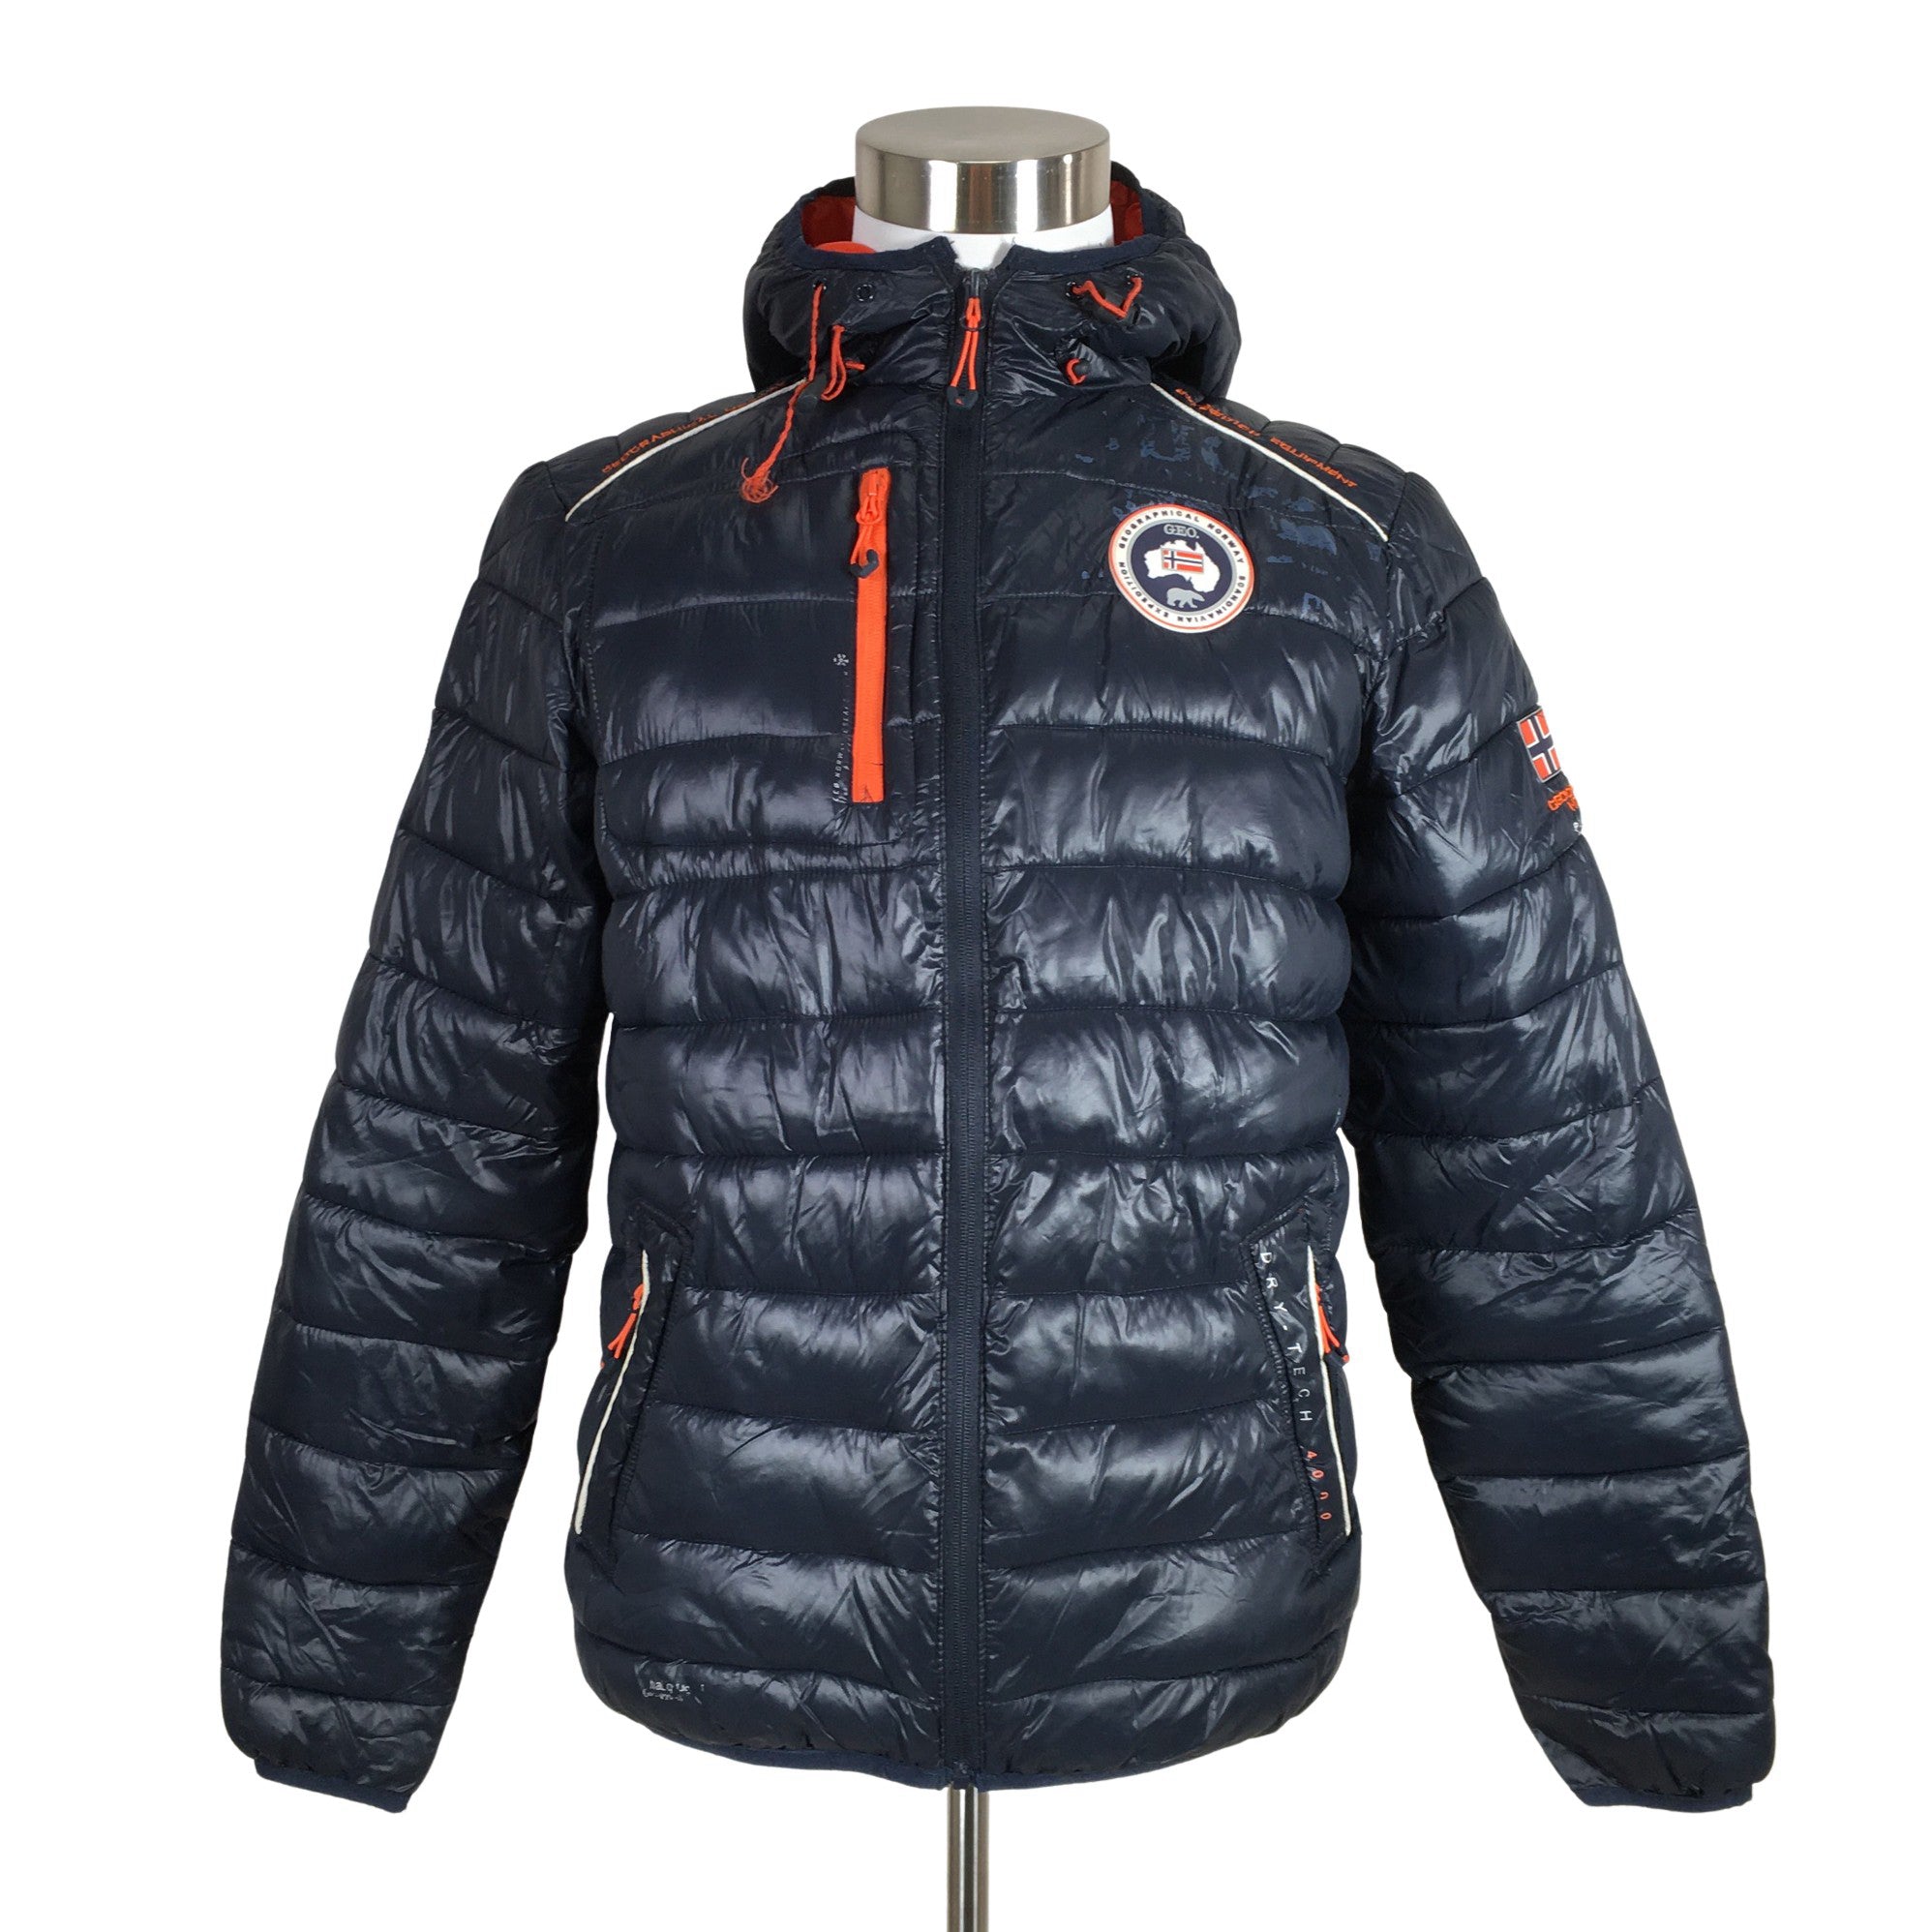 Black Regular Size Geographical Norway Clothing for Men for sale